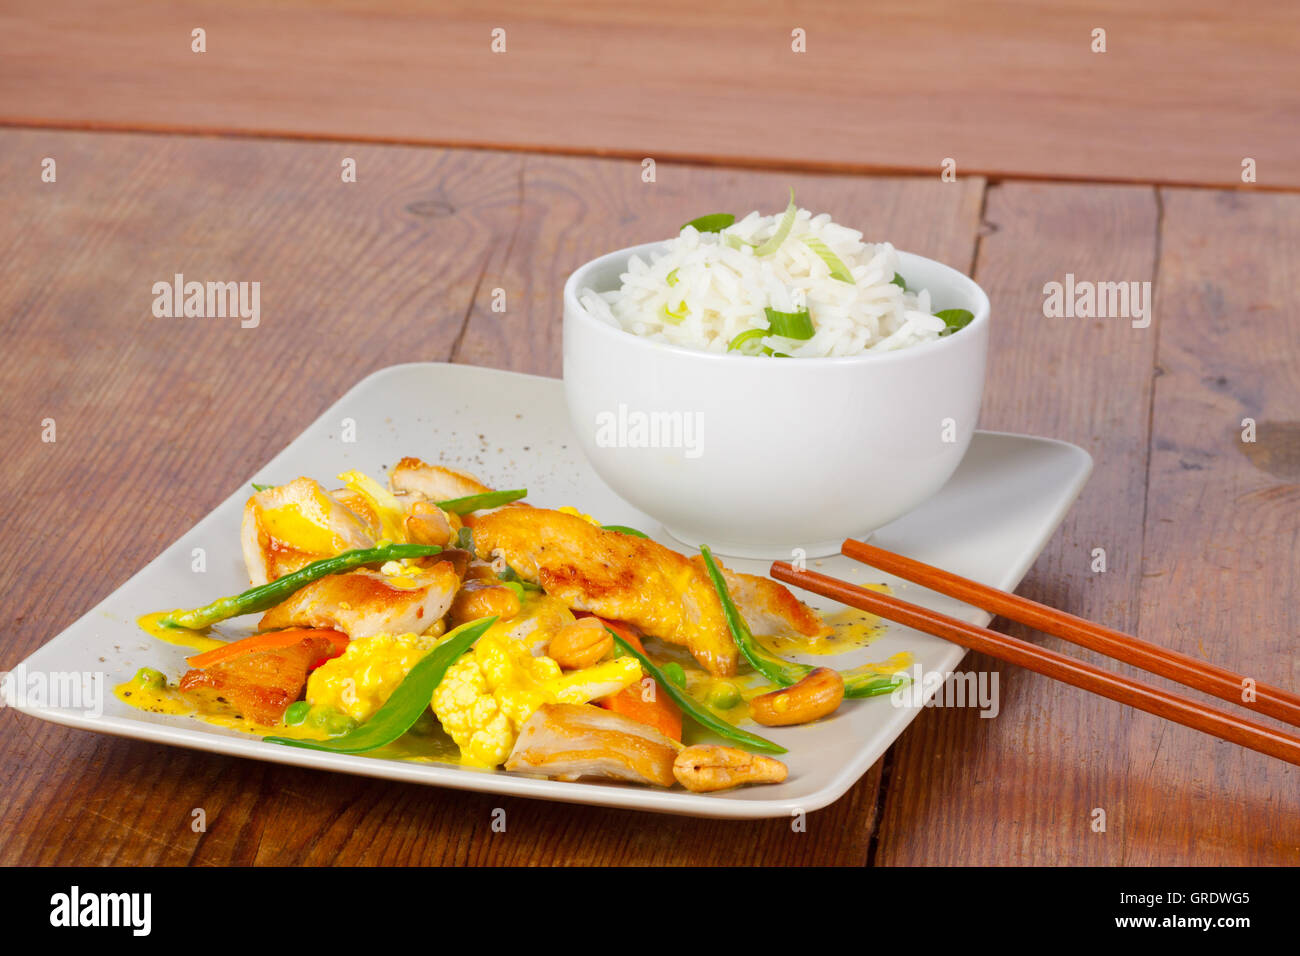 Chicken Filet With Beans And Vegetables Rice In Bowl Stock Photo